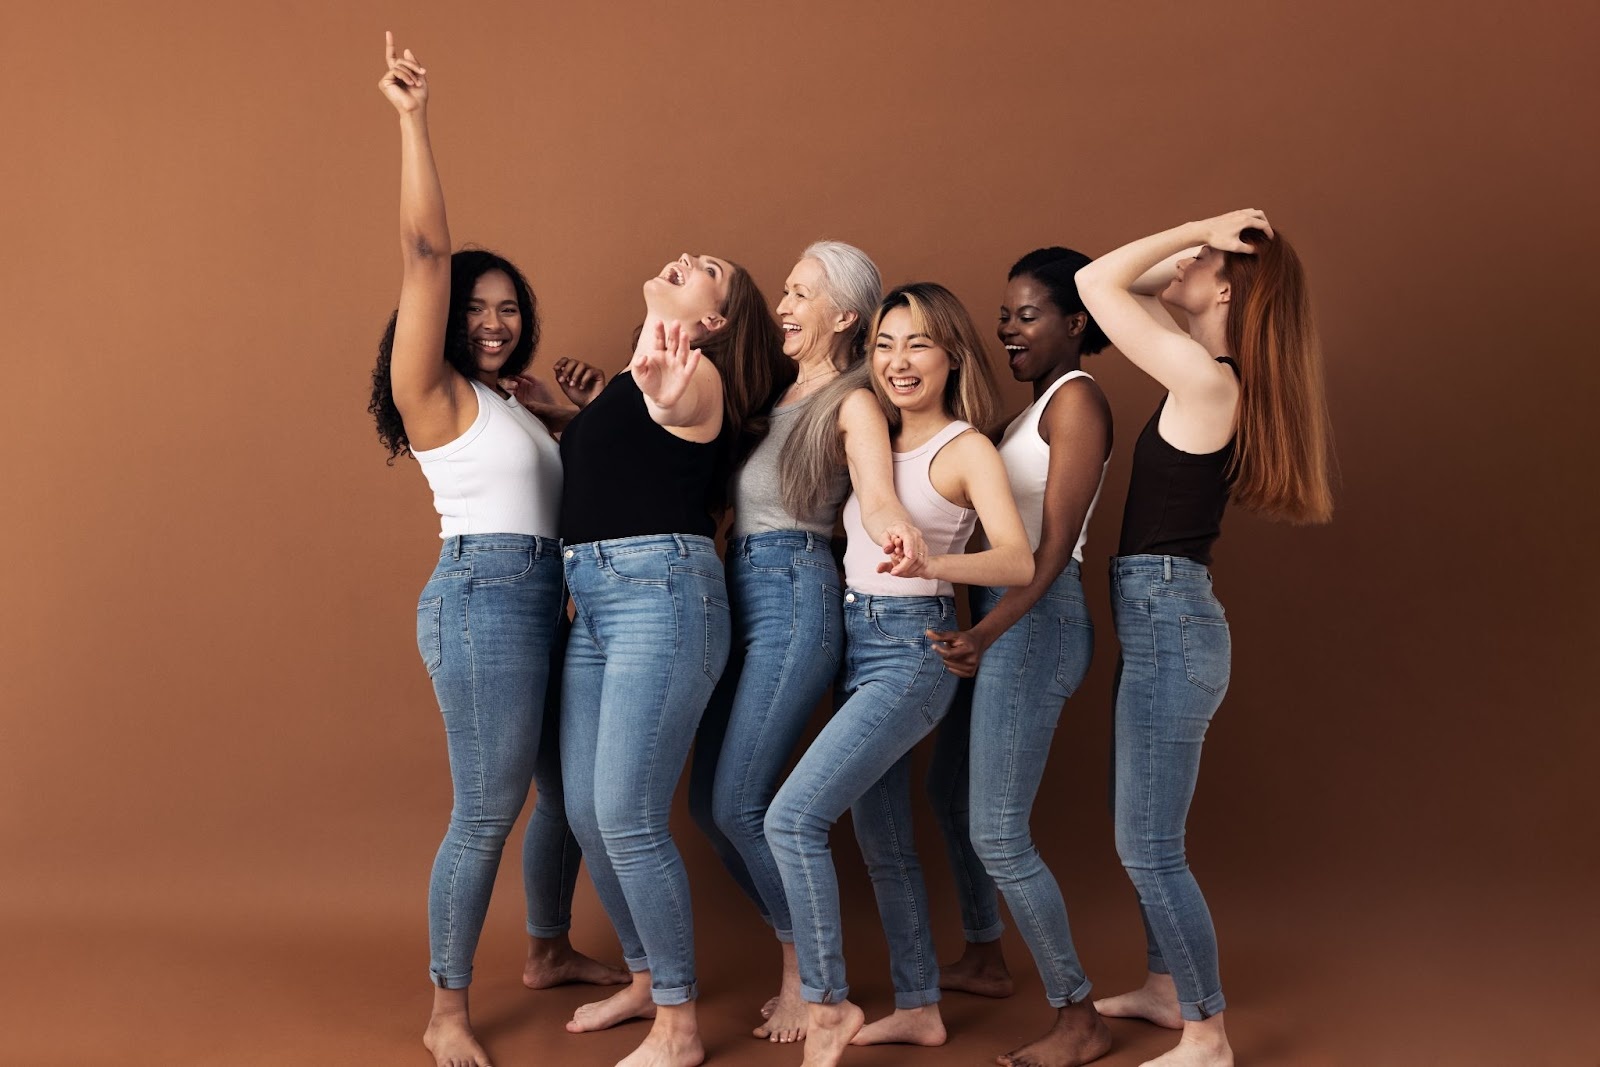 Women of different body types are shown dancing in a side-view perspective.